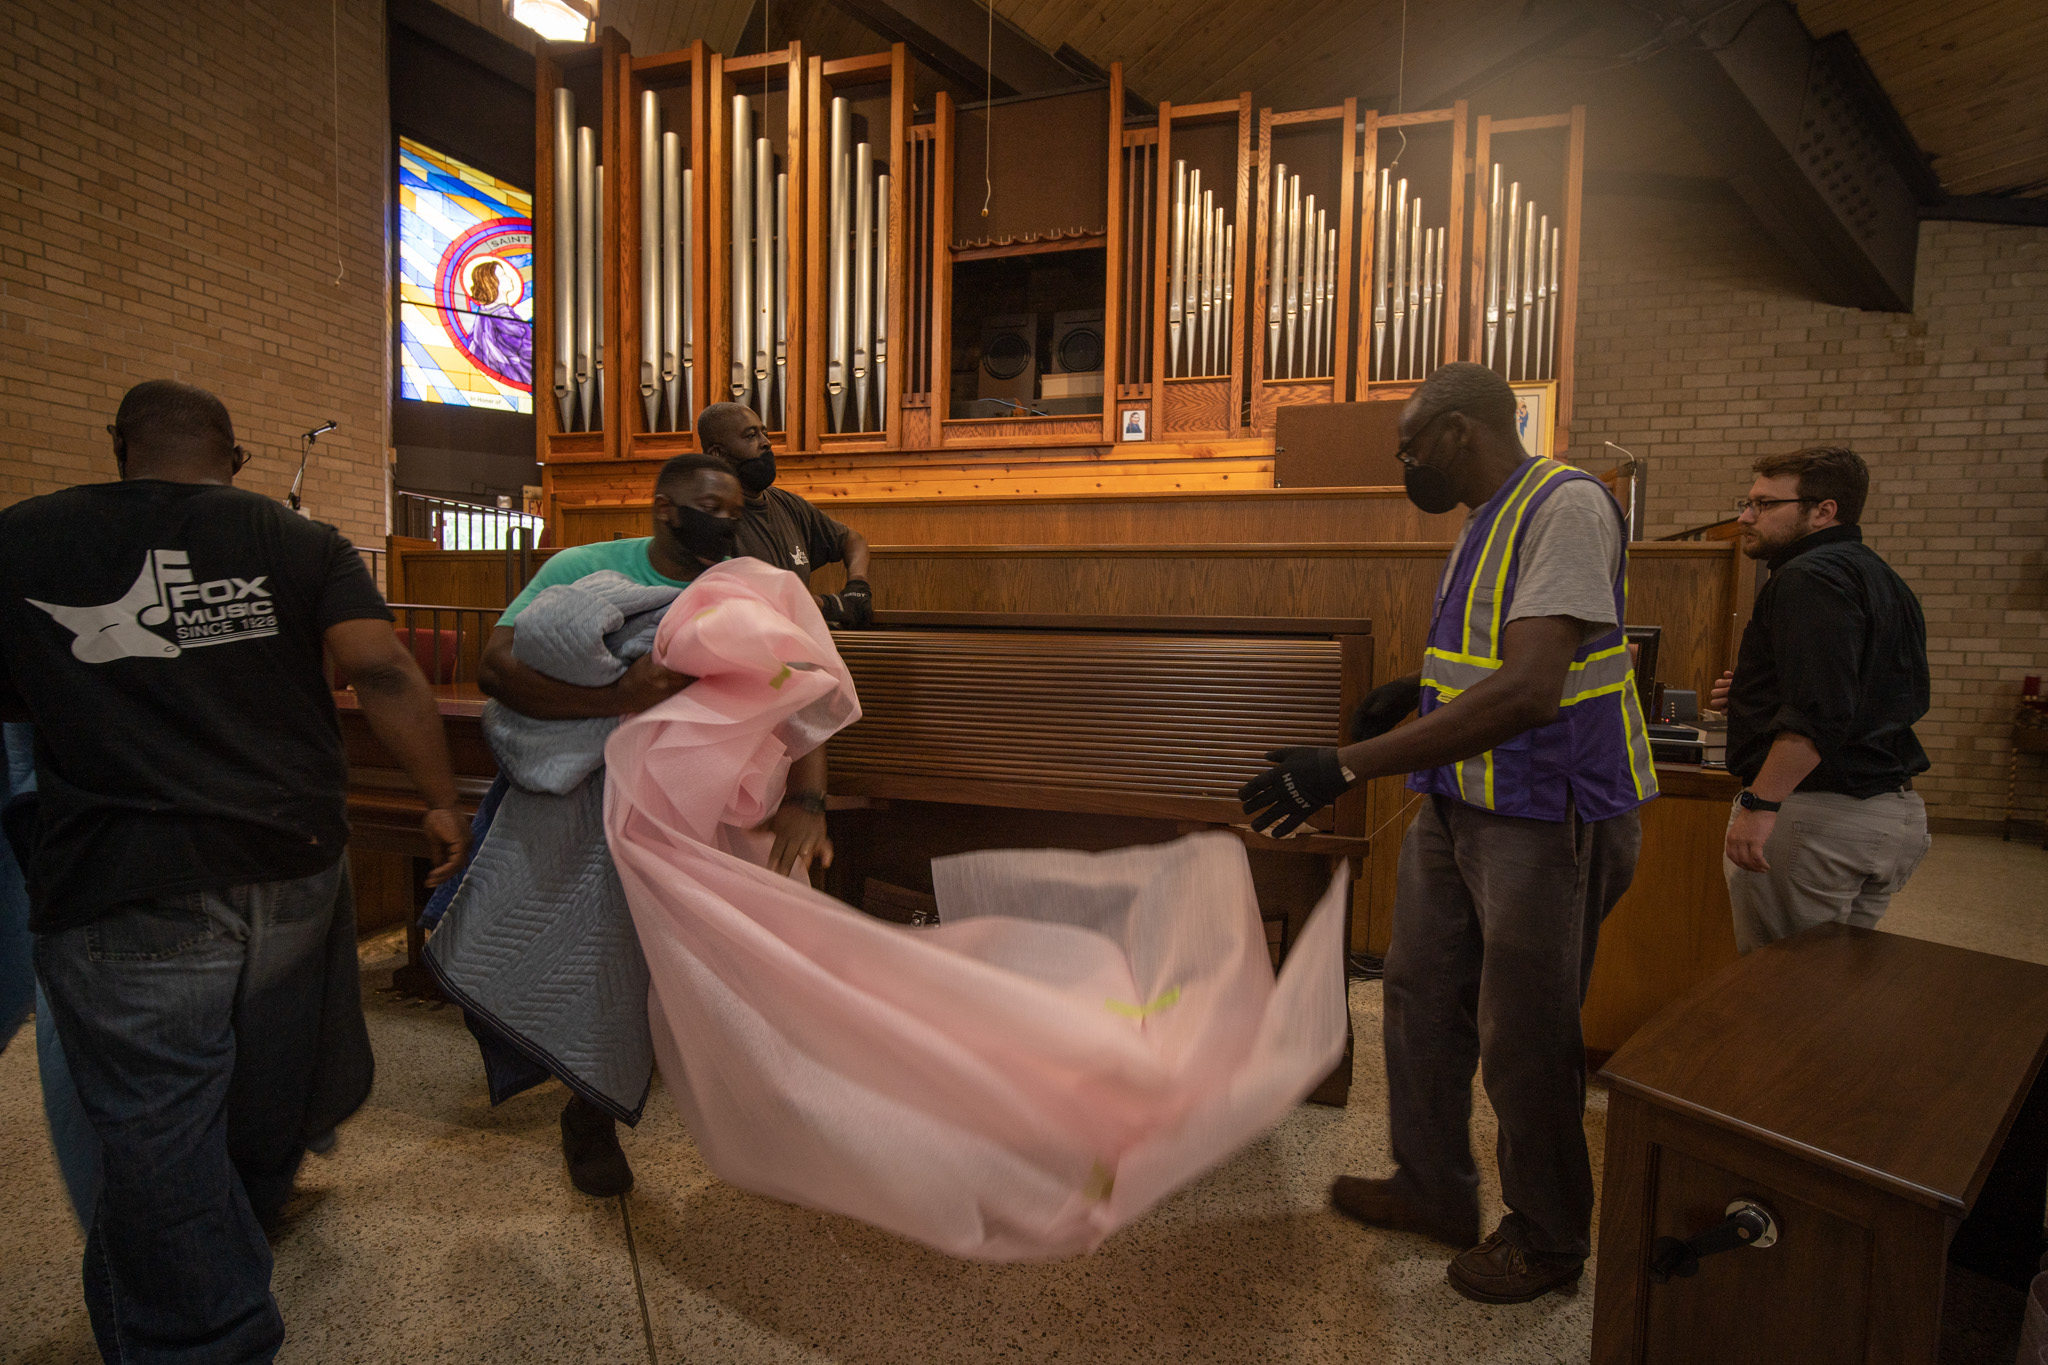 Unwrapping of the organ